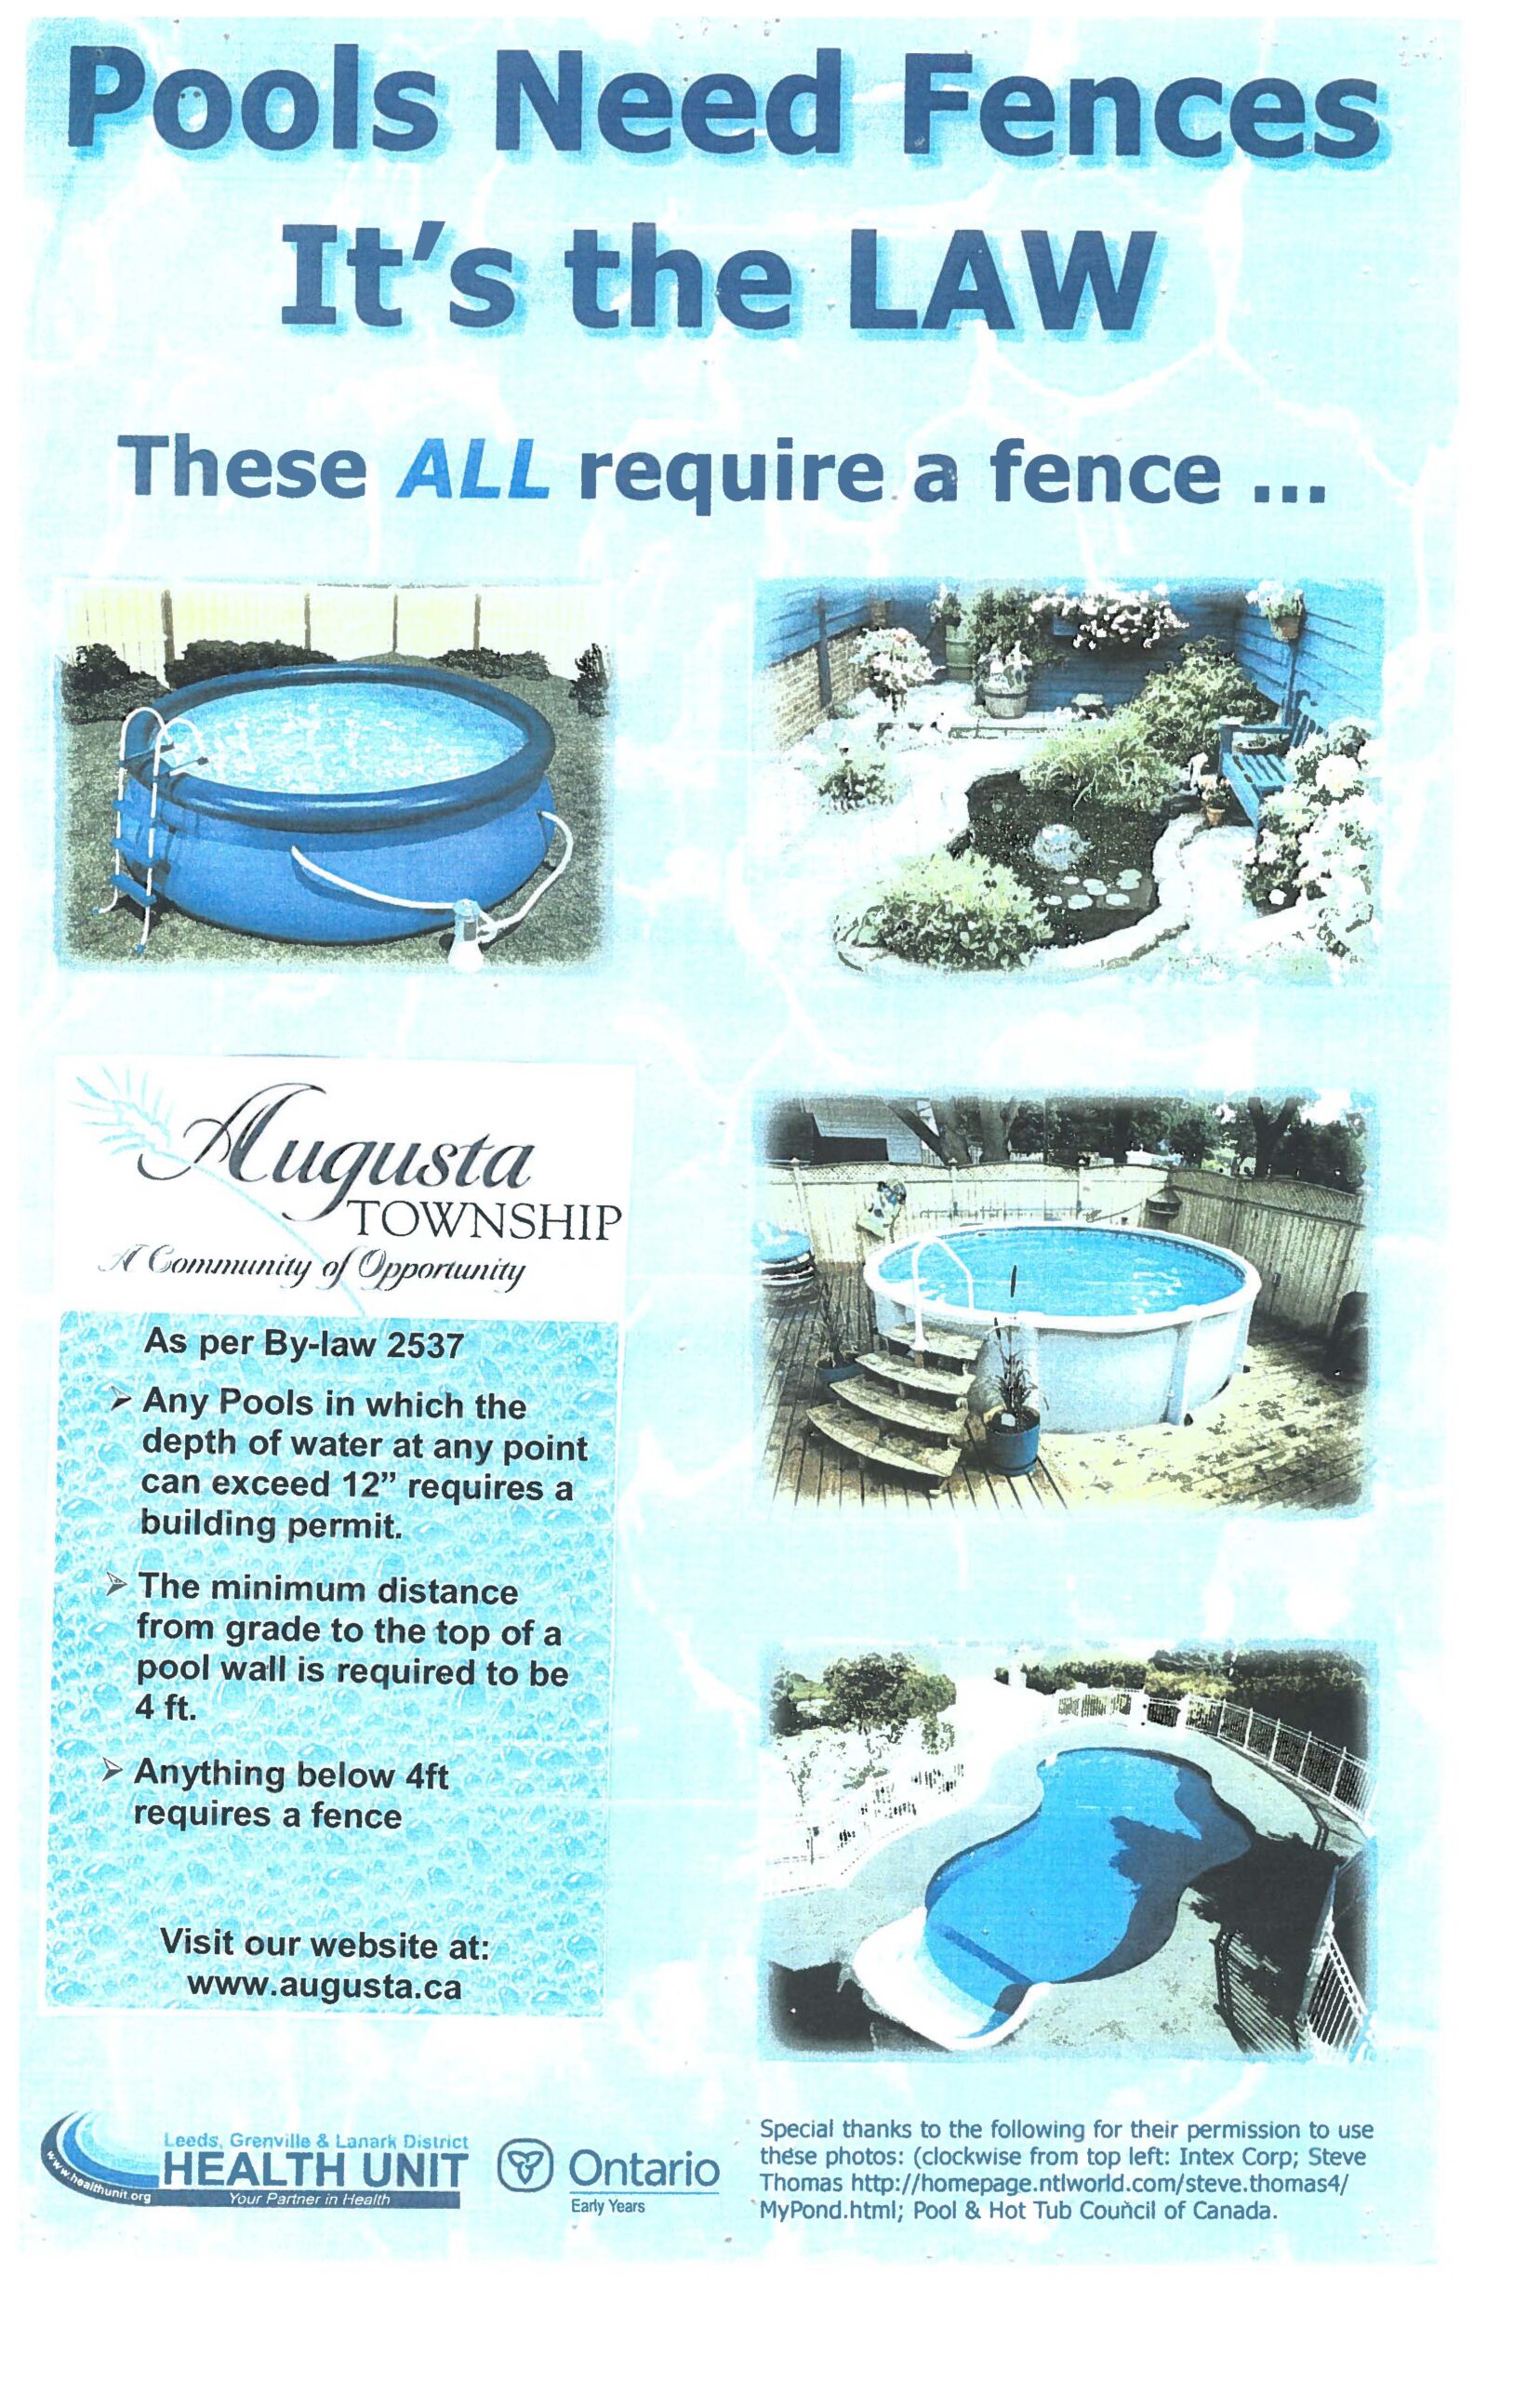 pools need fences. it's the law. these all require a fence (shows photos of pools that need fences).